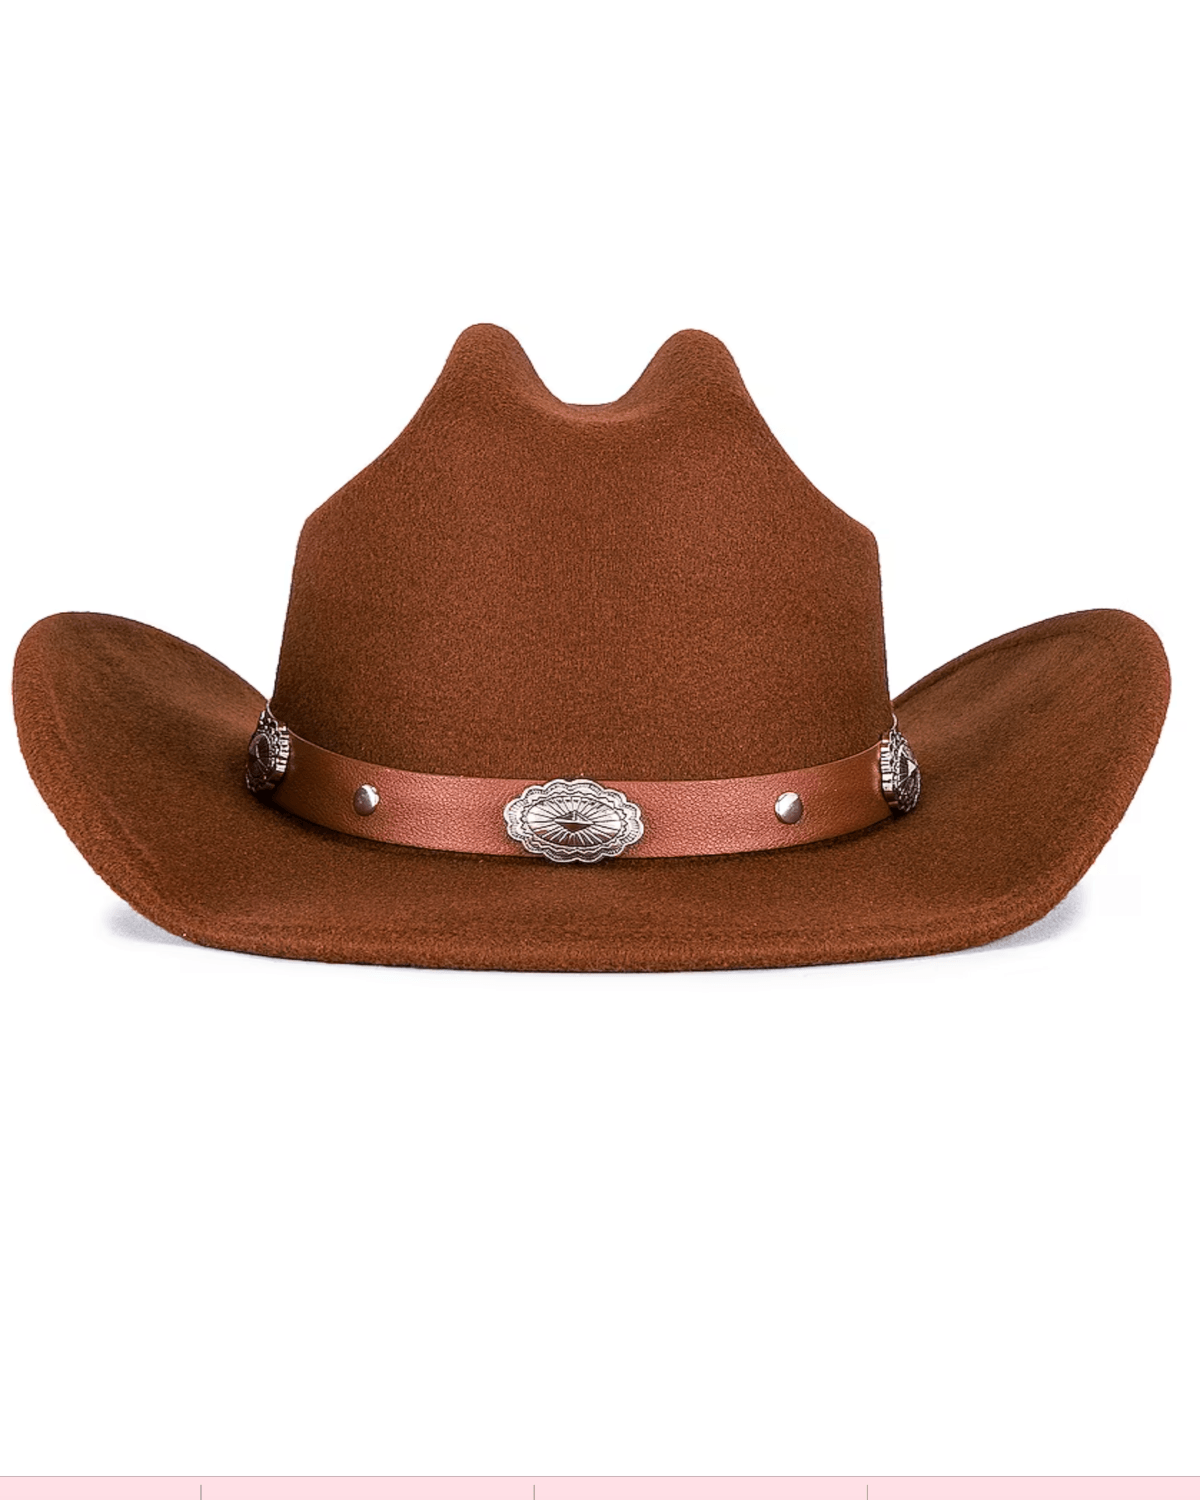 COWBOY HAT - 8 Other Reasons